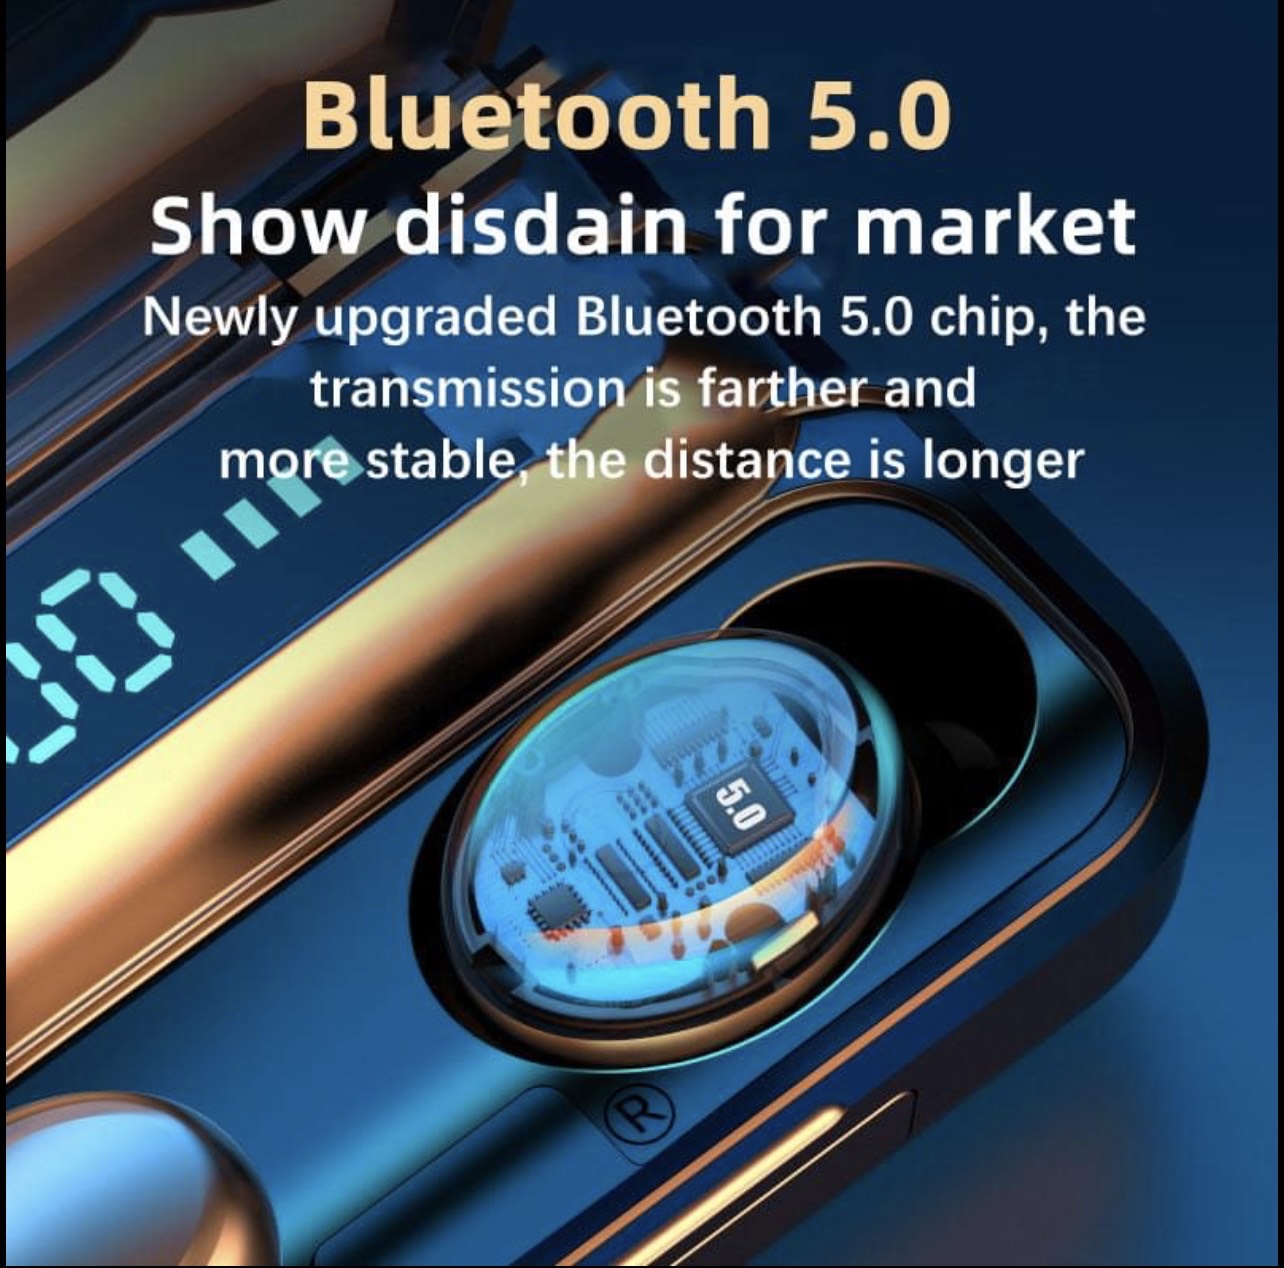 Bluetooth 5.0 Earbuds TWS Wireless Headphones Headset Stereo Samsung Android iPhone Earphone Gift.